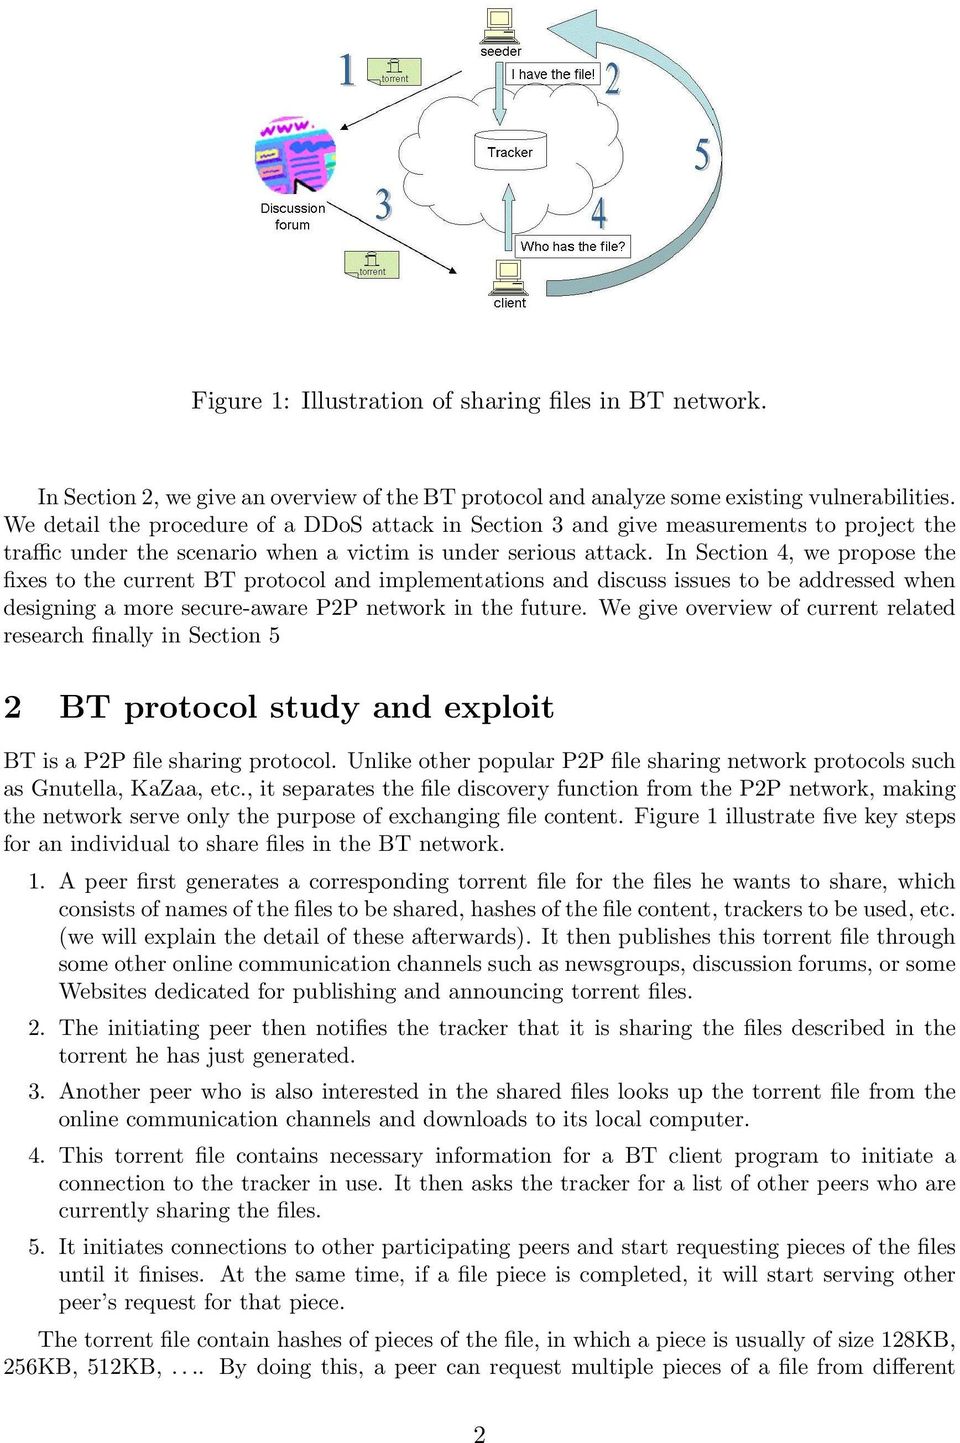 In Section 4, we propose the fixes to the current BT protocol and implementations and discuss issues to be addressed when designing a more secure-aware P2P network in the future.